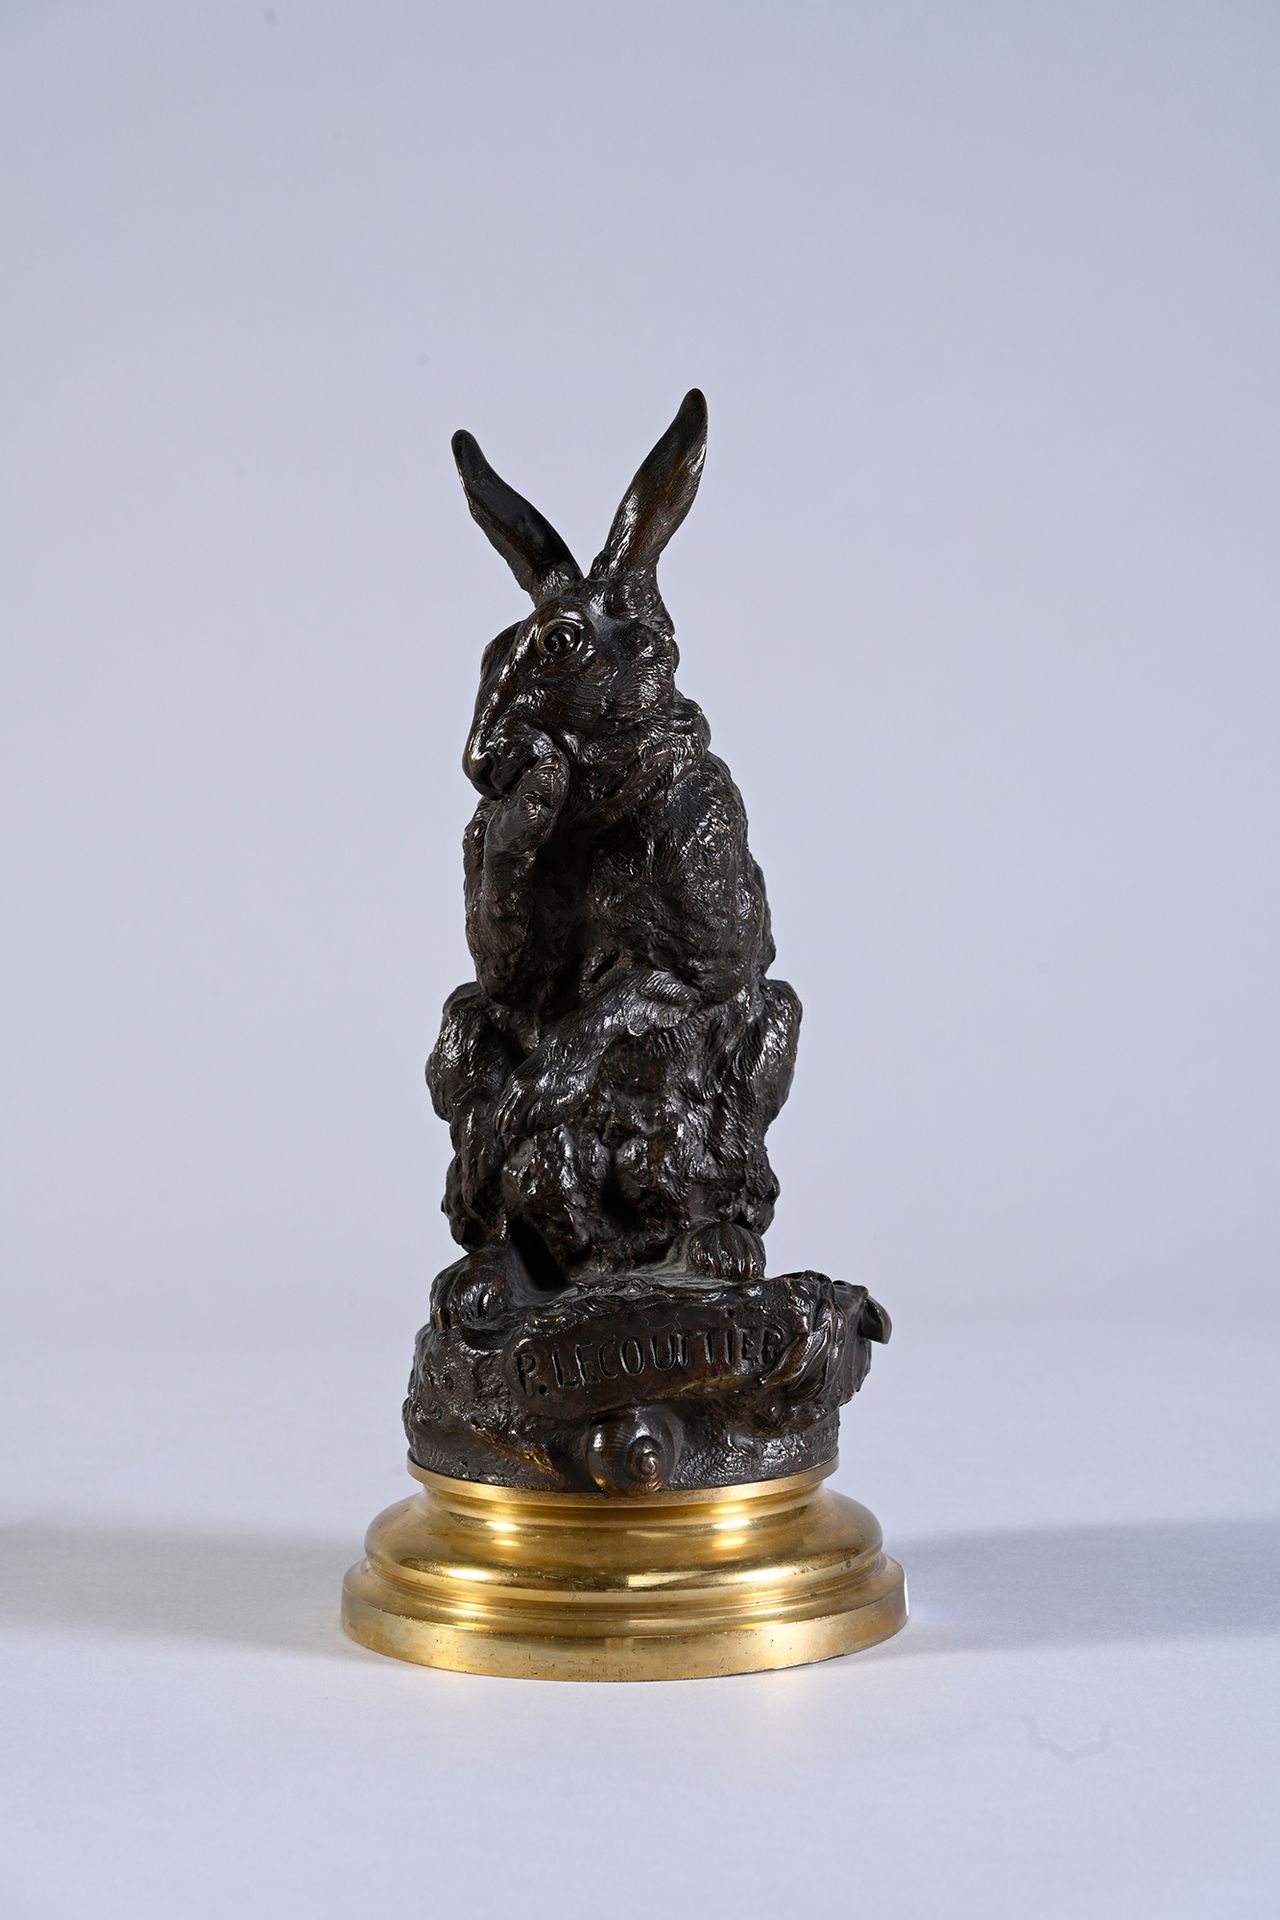 Prosper Leccourtier (1851-1925) Rabbit licking itself
Bronze with brown patina, &hellip;